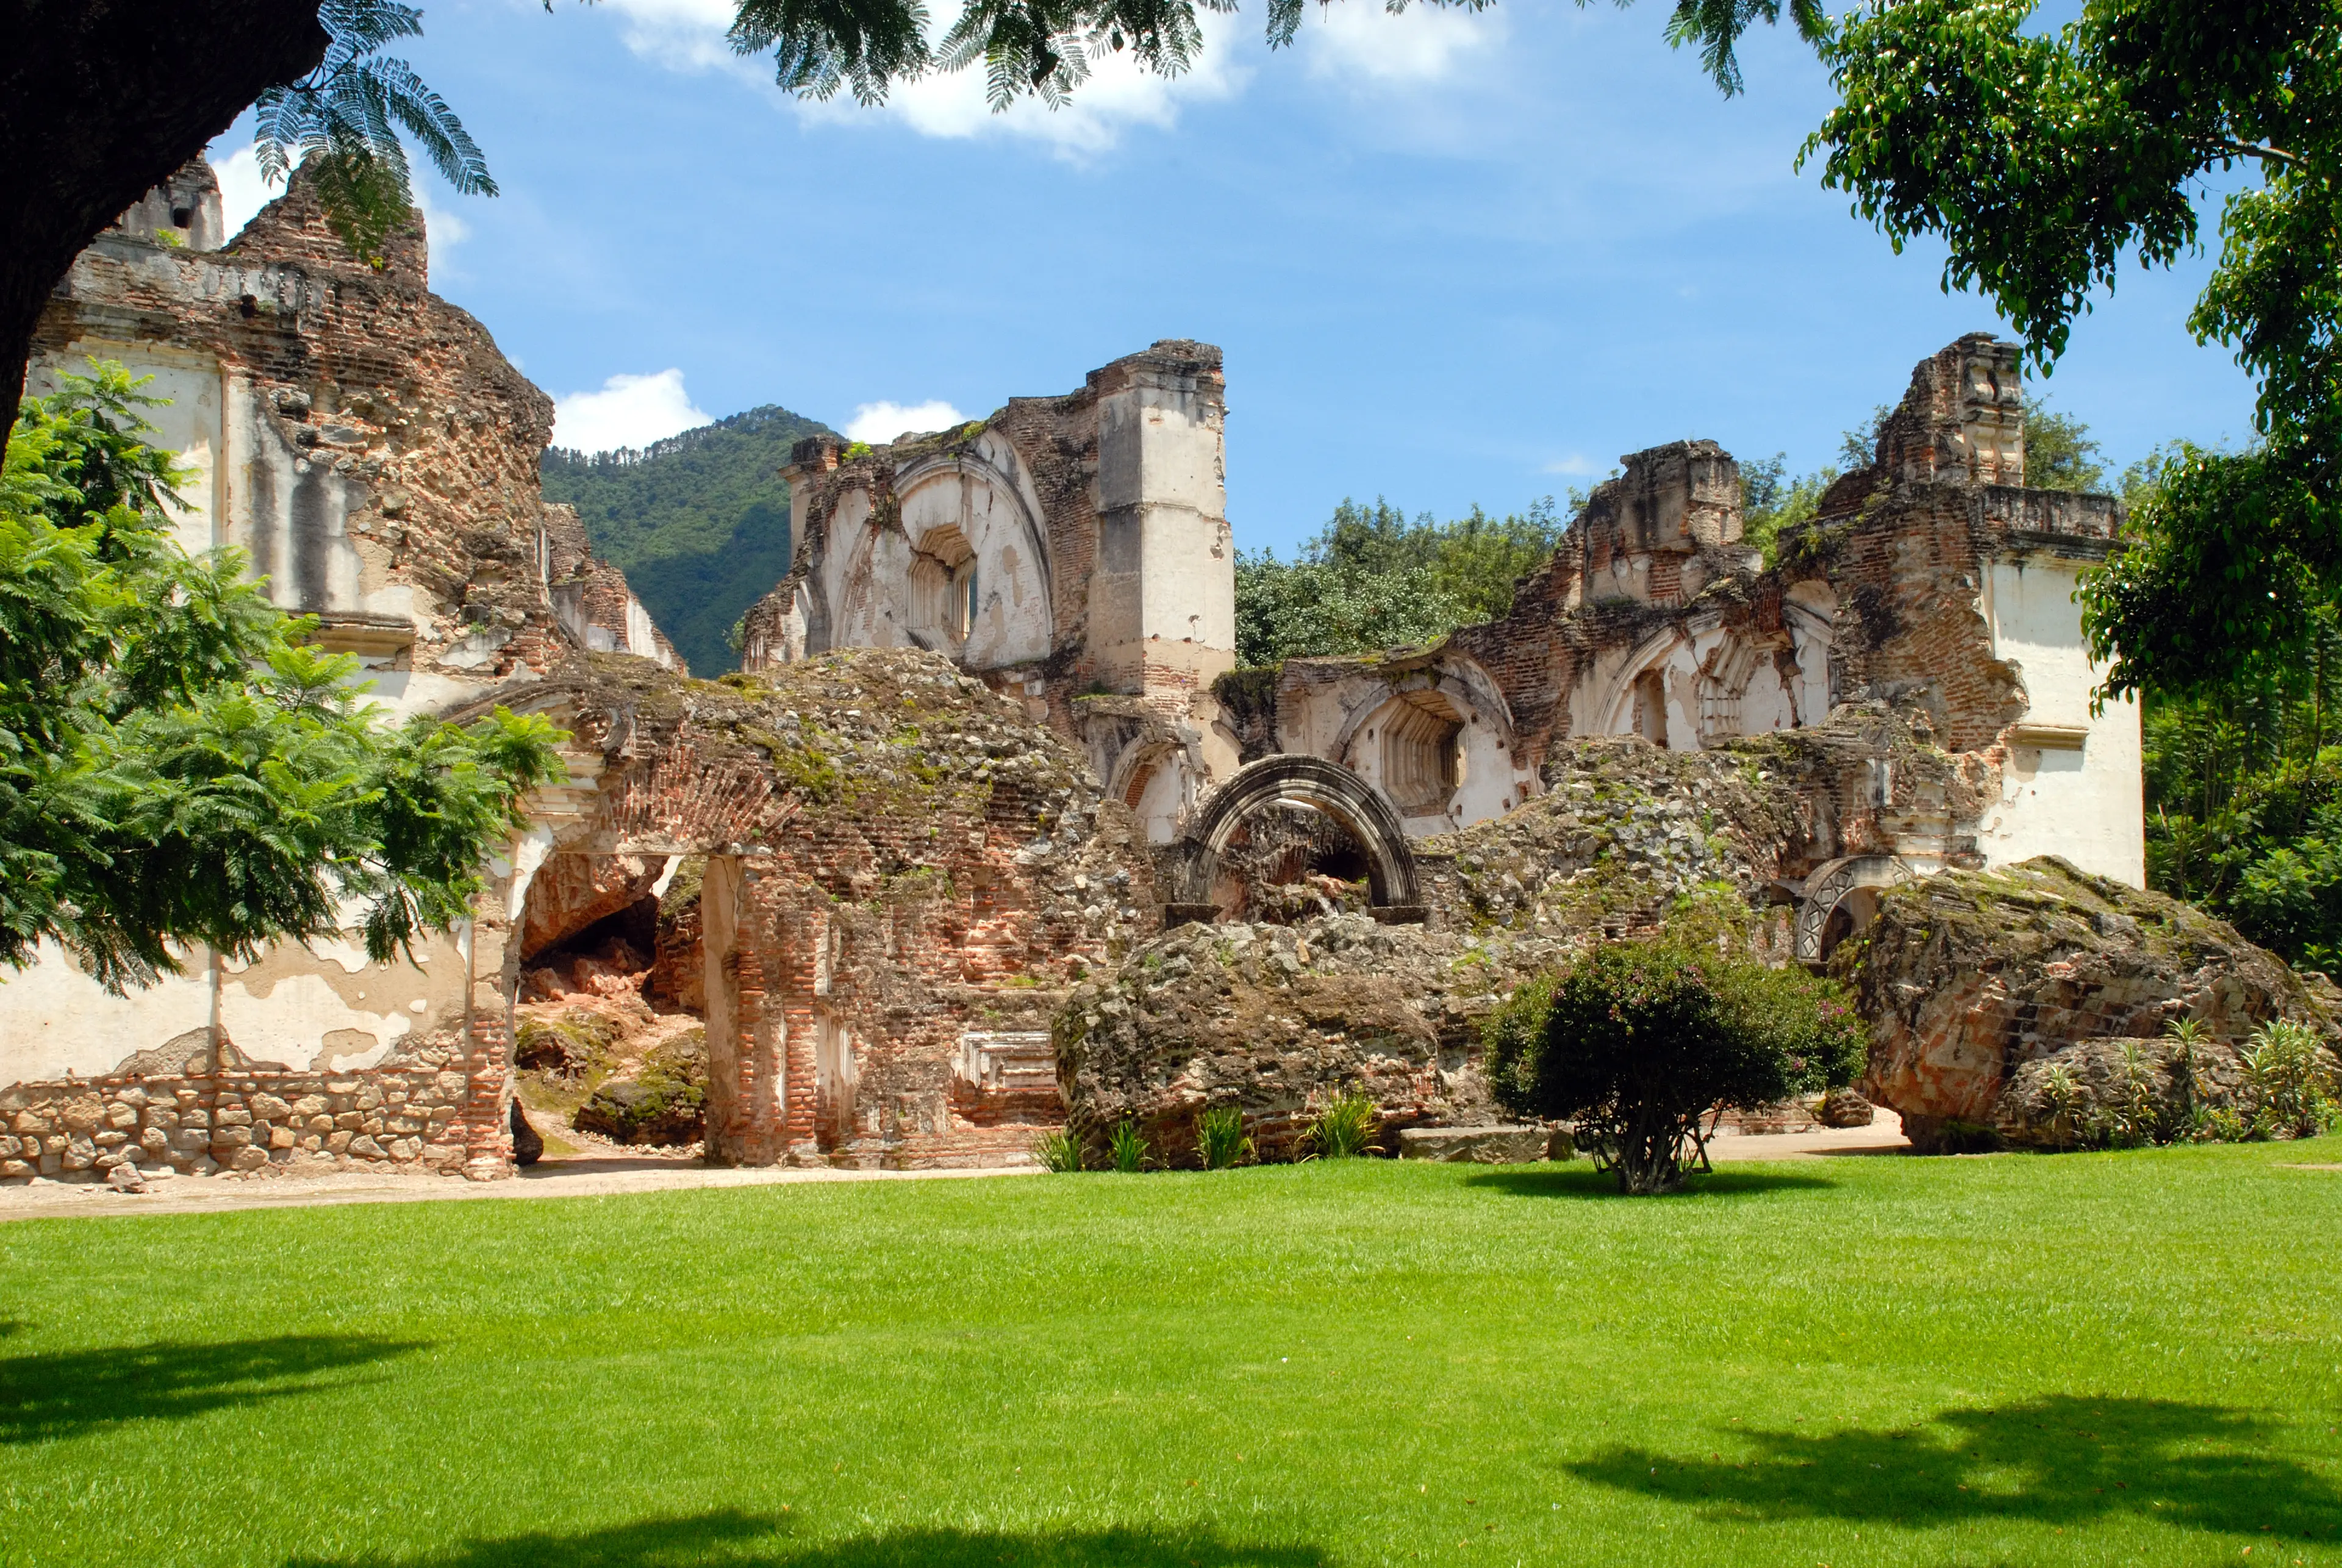 1-Day Solo Sightseeing Trip in Antigua, Guatemala for Locals